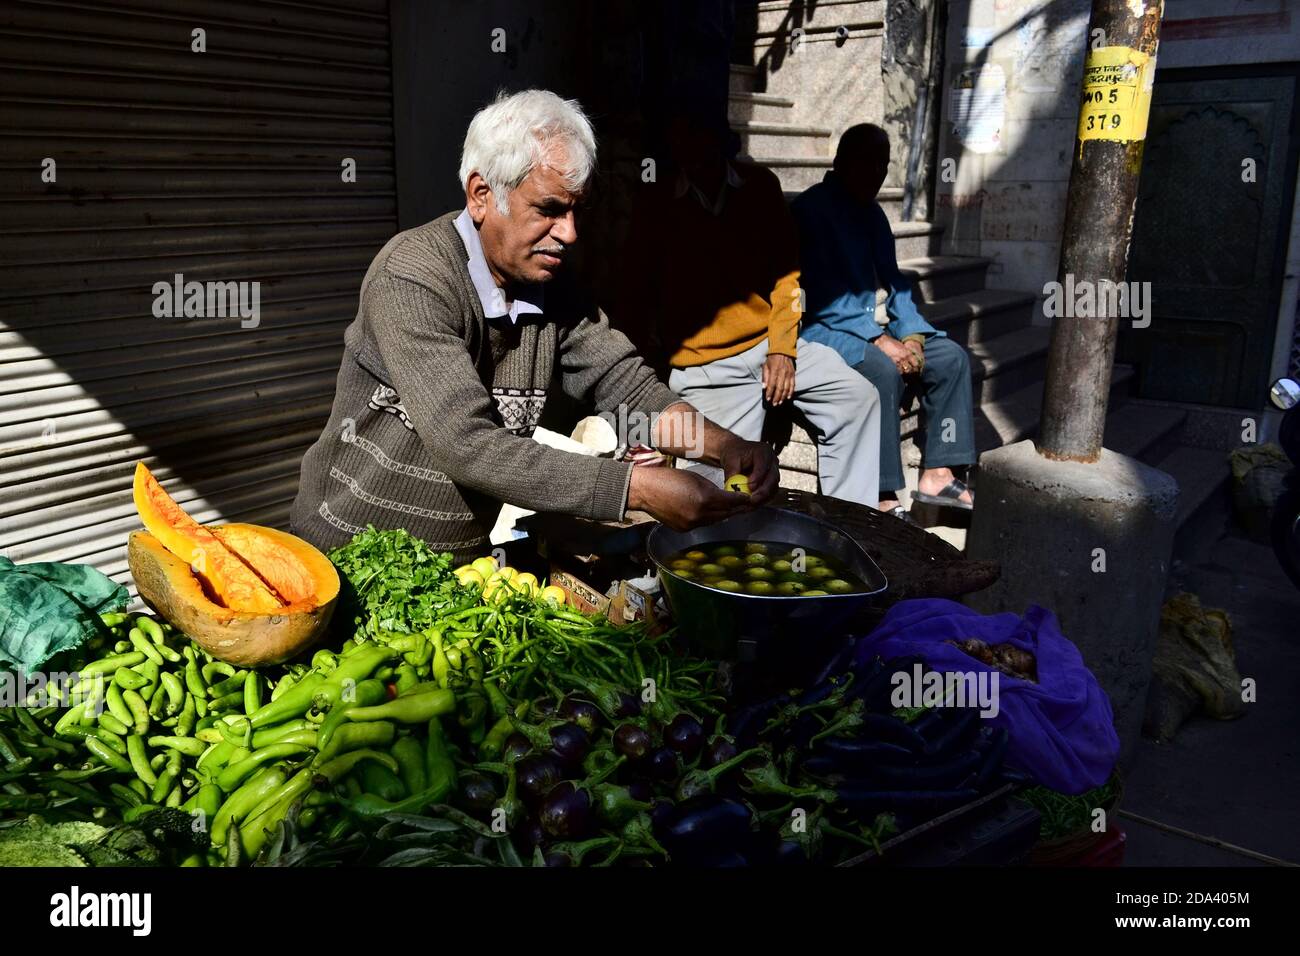 Udaipur, Rajasthan, India - December, 2016: Aged salesman selling vegetables on the street market. Indian man seller near street vendor in the morning Stock Photo